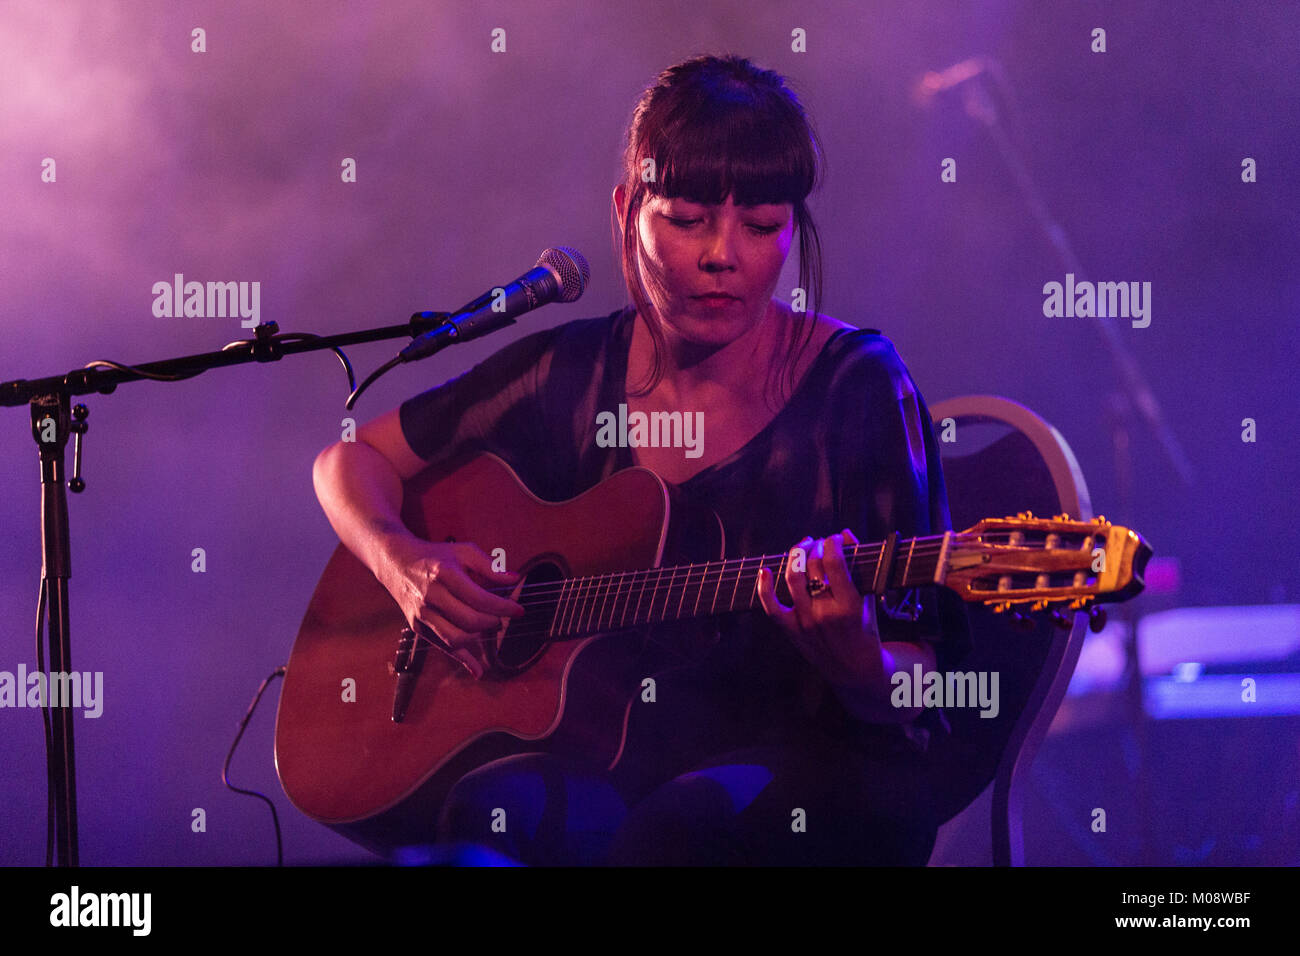 The Swedish singer, songwriter and musician Sandra Sumie Nagano is better known by her stage name Sumie and here seen at a live concert at Rockefeller in Oslo. Norway, 01/08 2013. Stock Photo